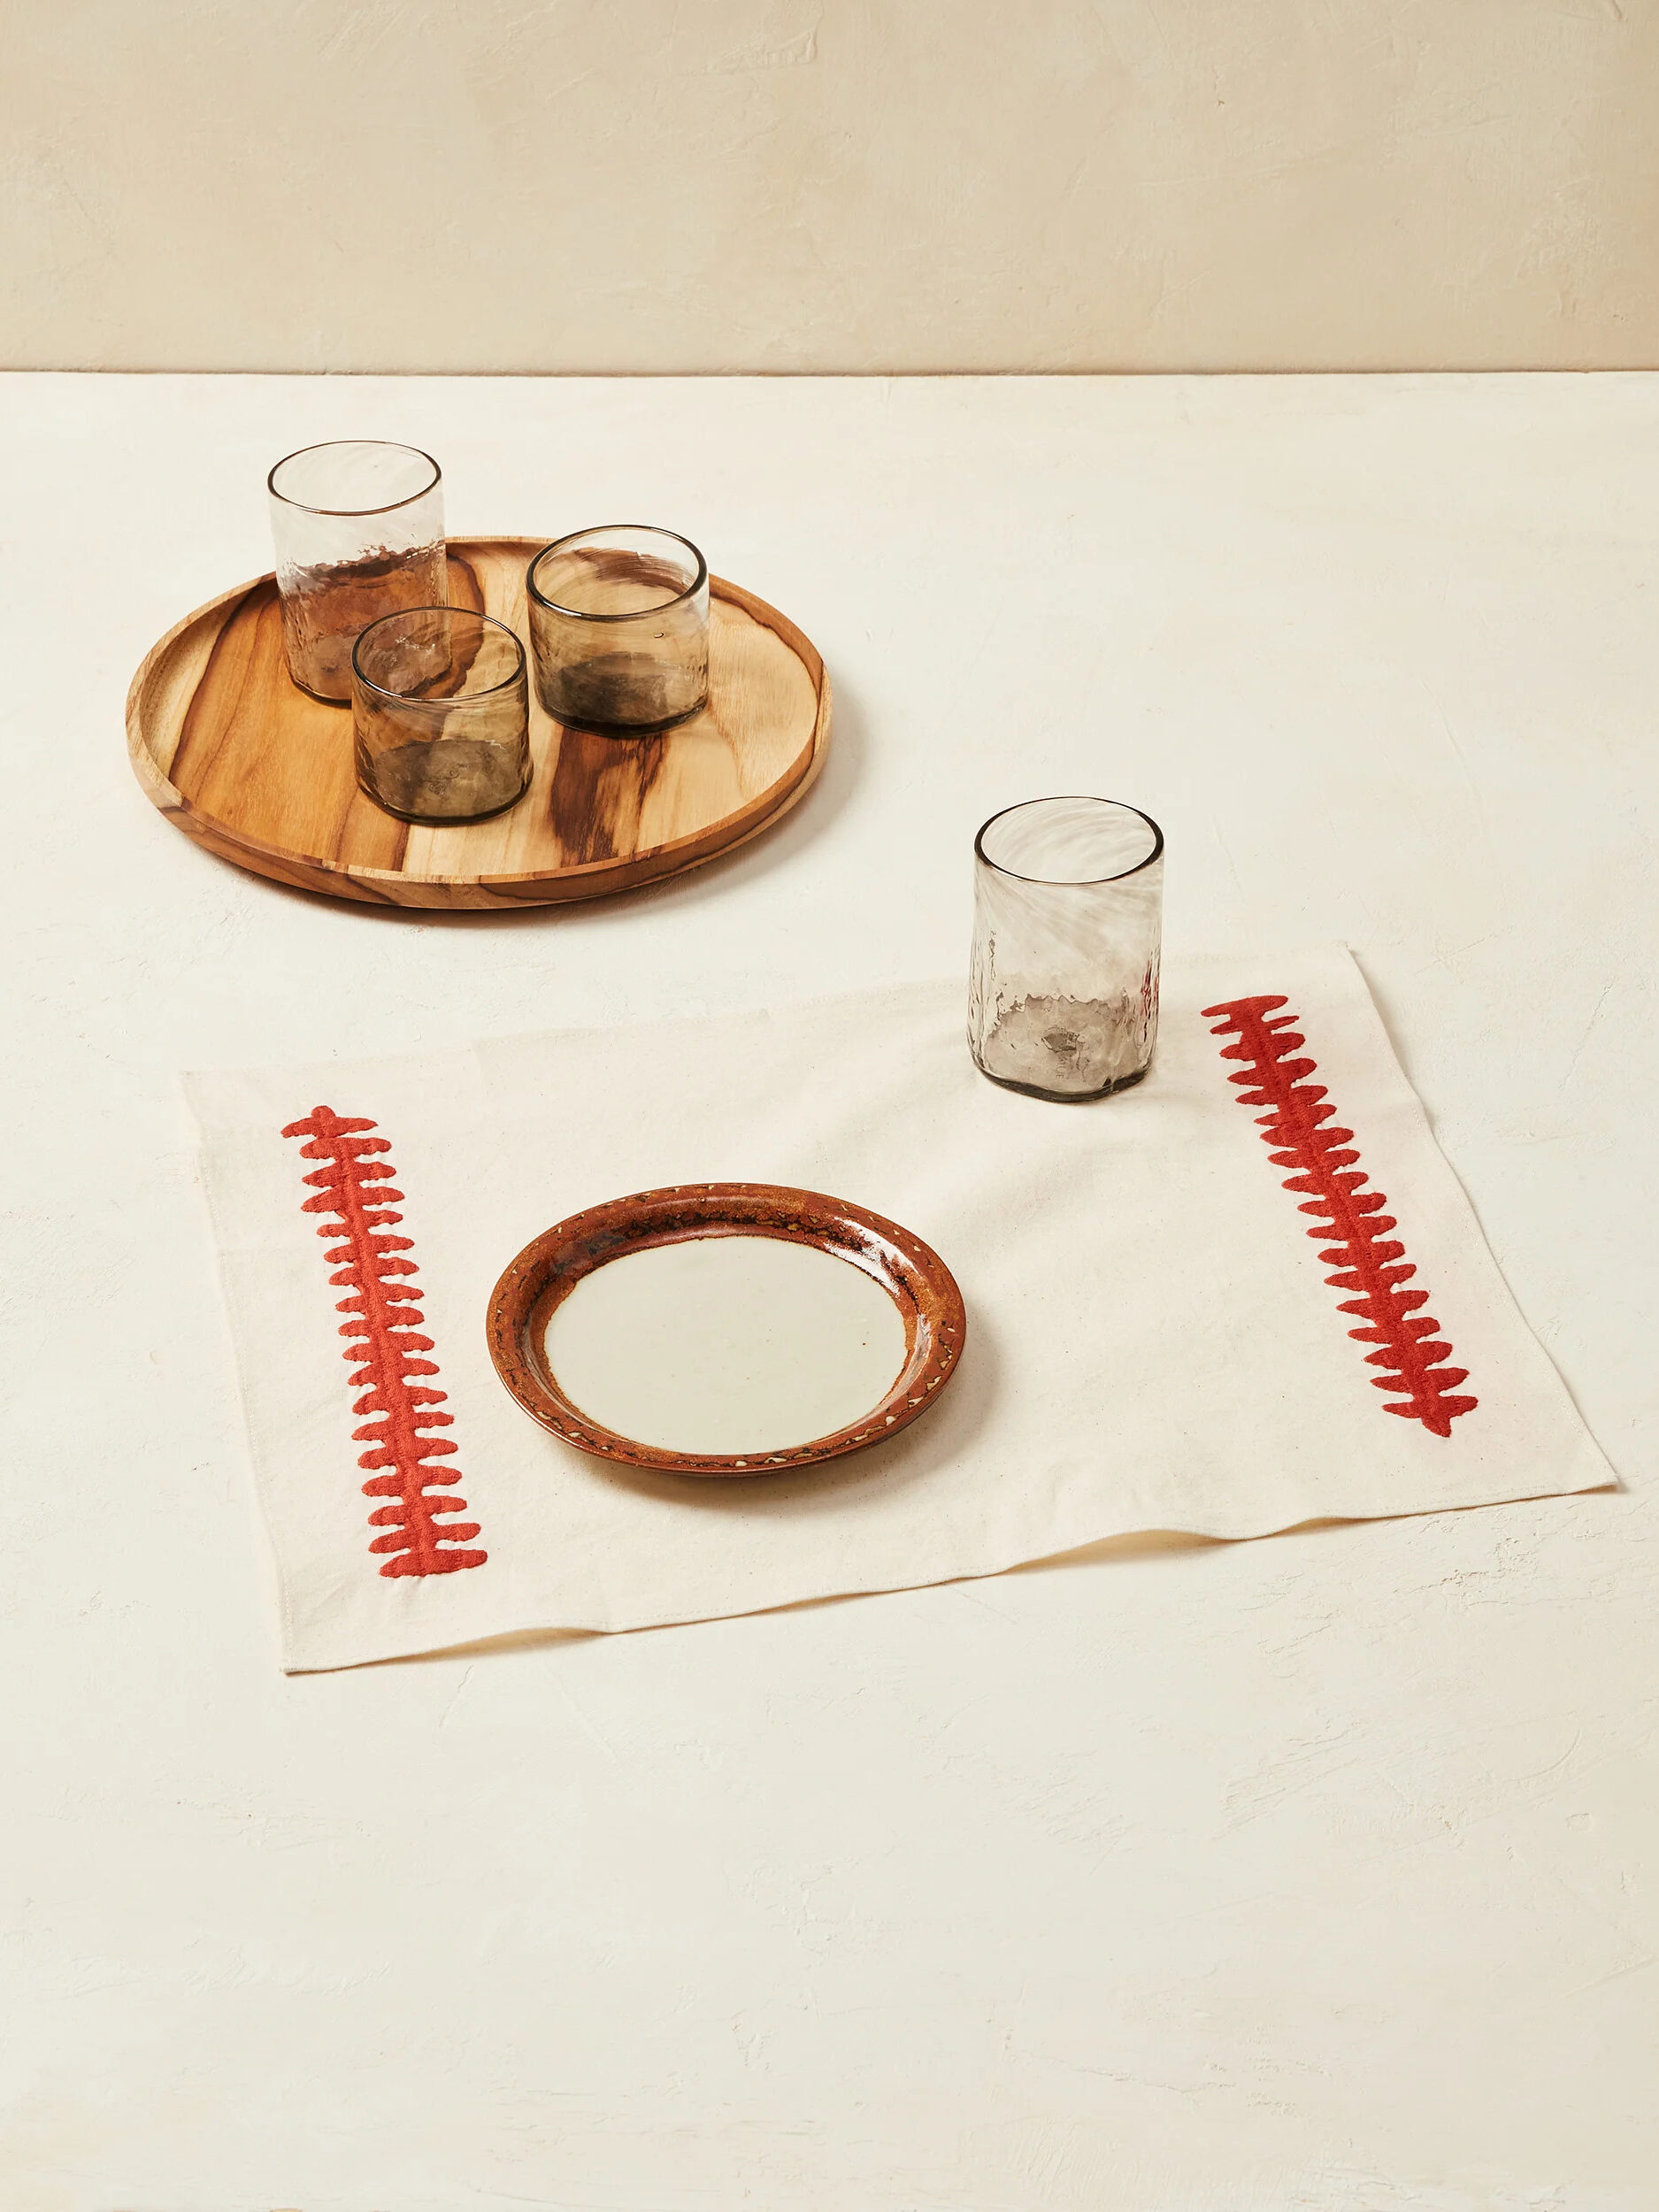 Charcoal clear glasses and a brown rimmed white plate styled on a white cloth placemat with thick red stitched details on the side. By Minna.